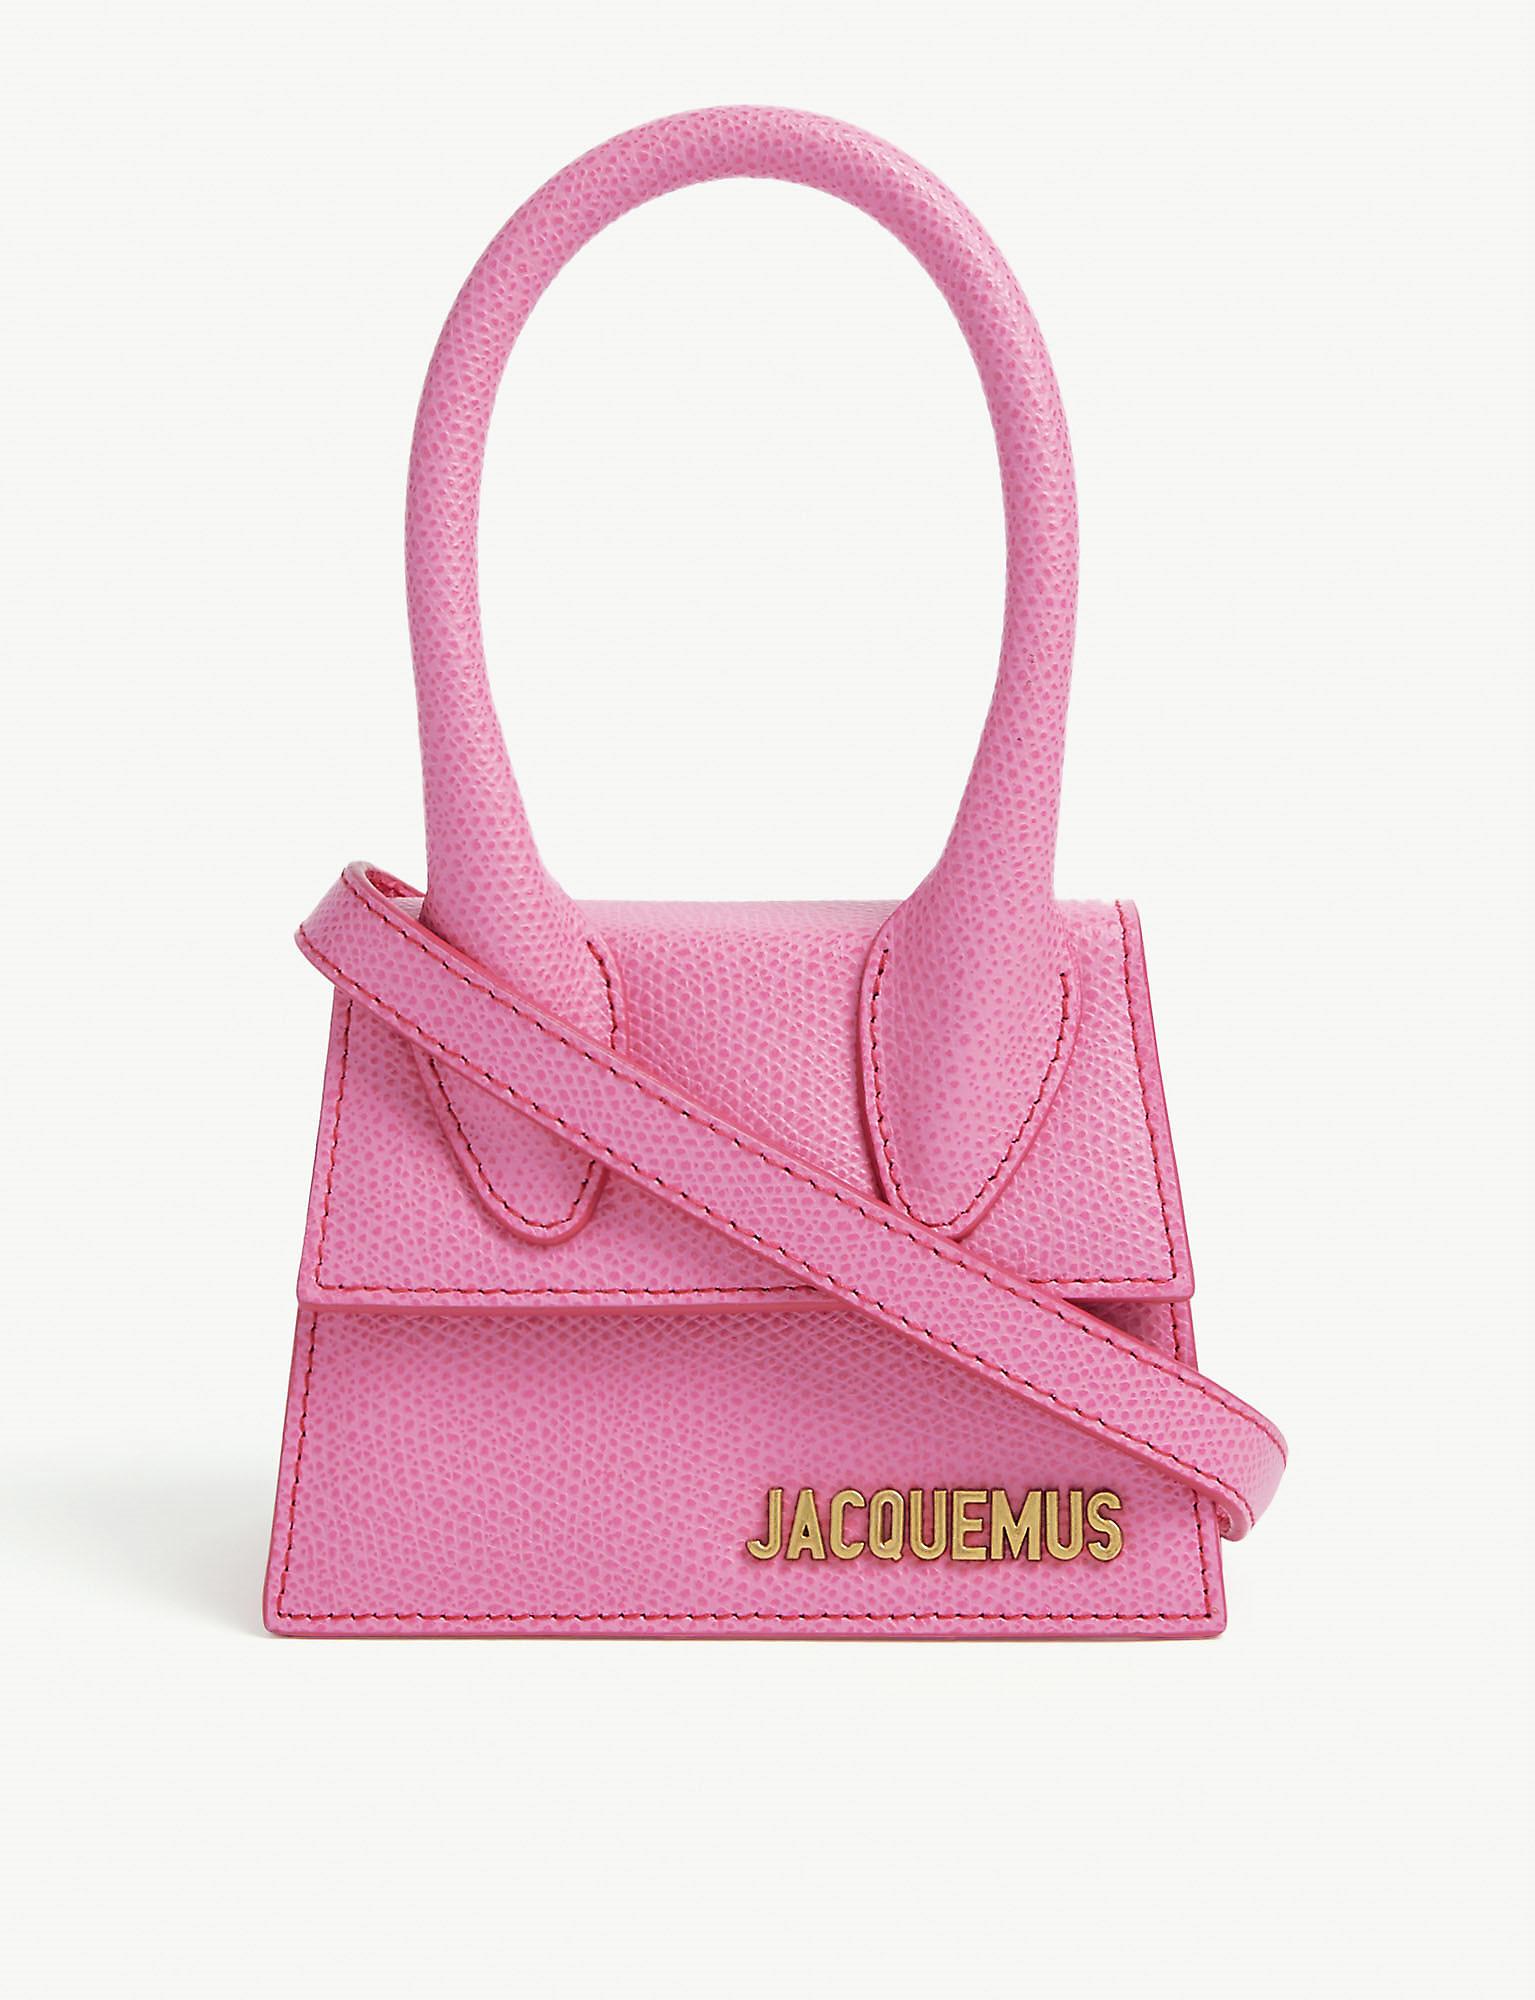 Jacquemus Le Chiquito Hand Bag in Pink